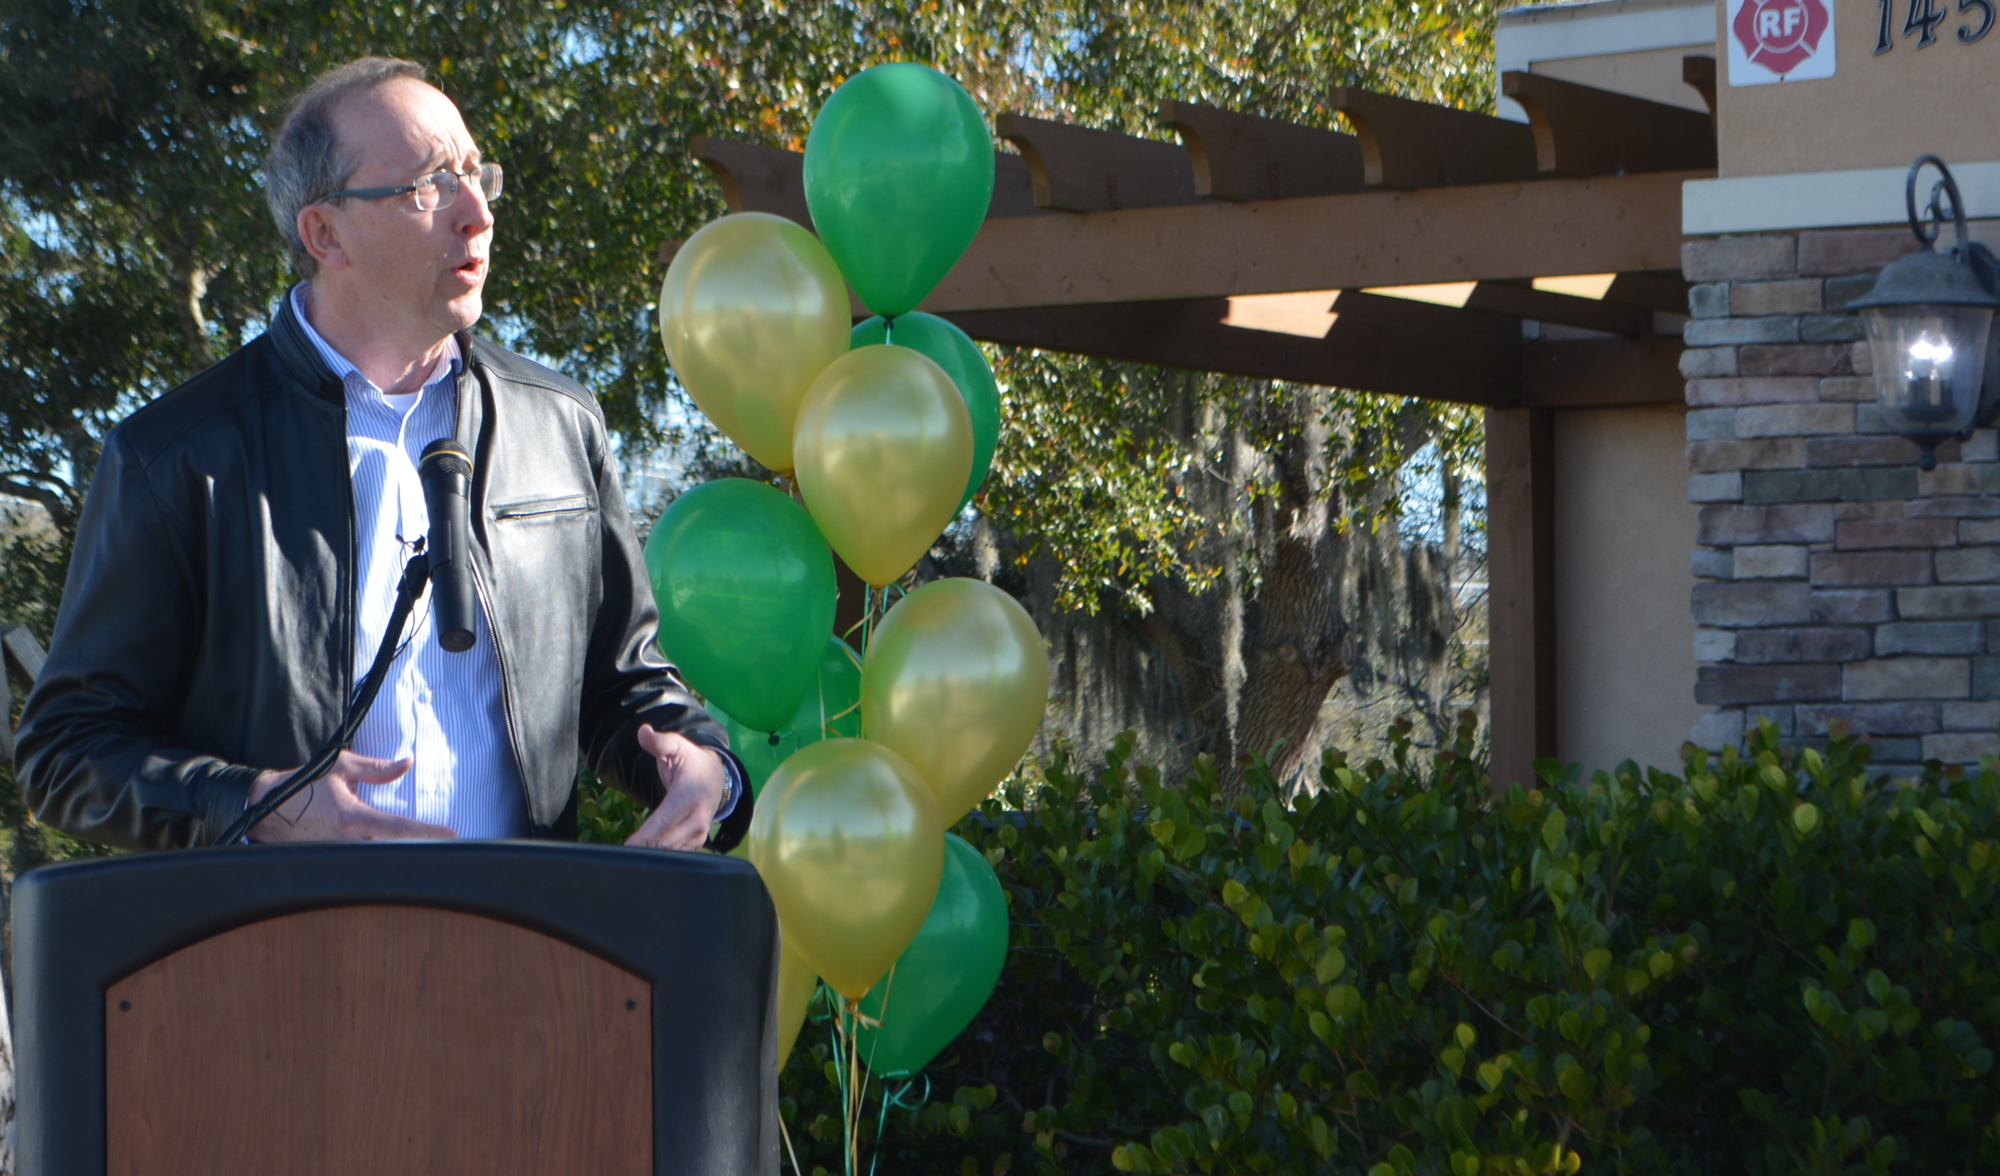 Terry Kirschner, the land development manager for Lennar, addresses the crowd during a press conference for the new Sheriff's Department substation in Lakewood Ranch.